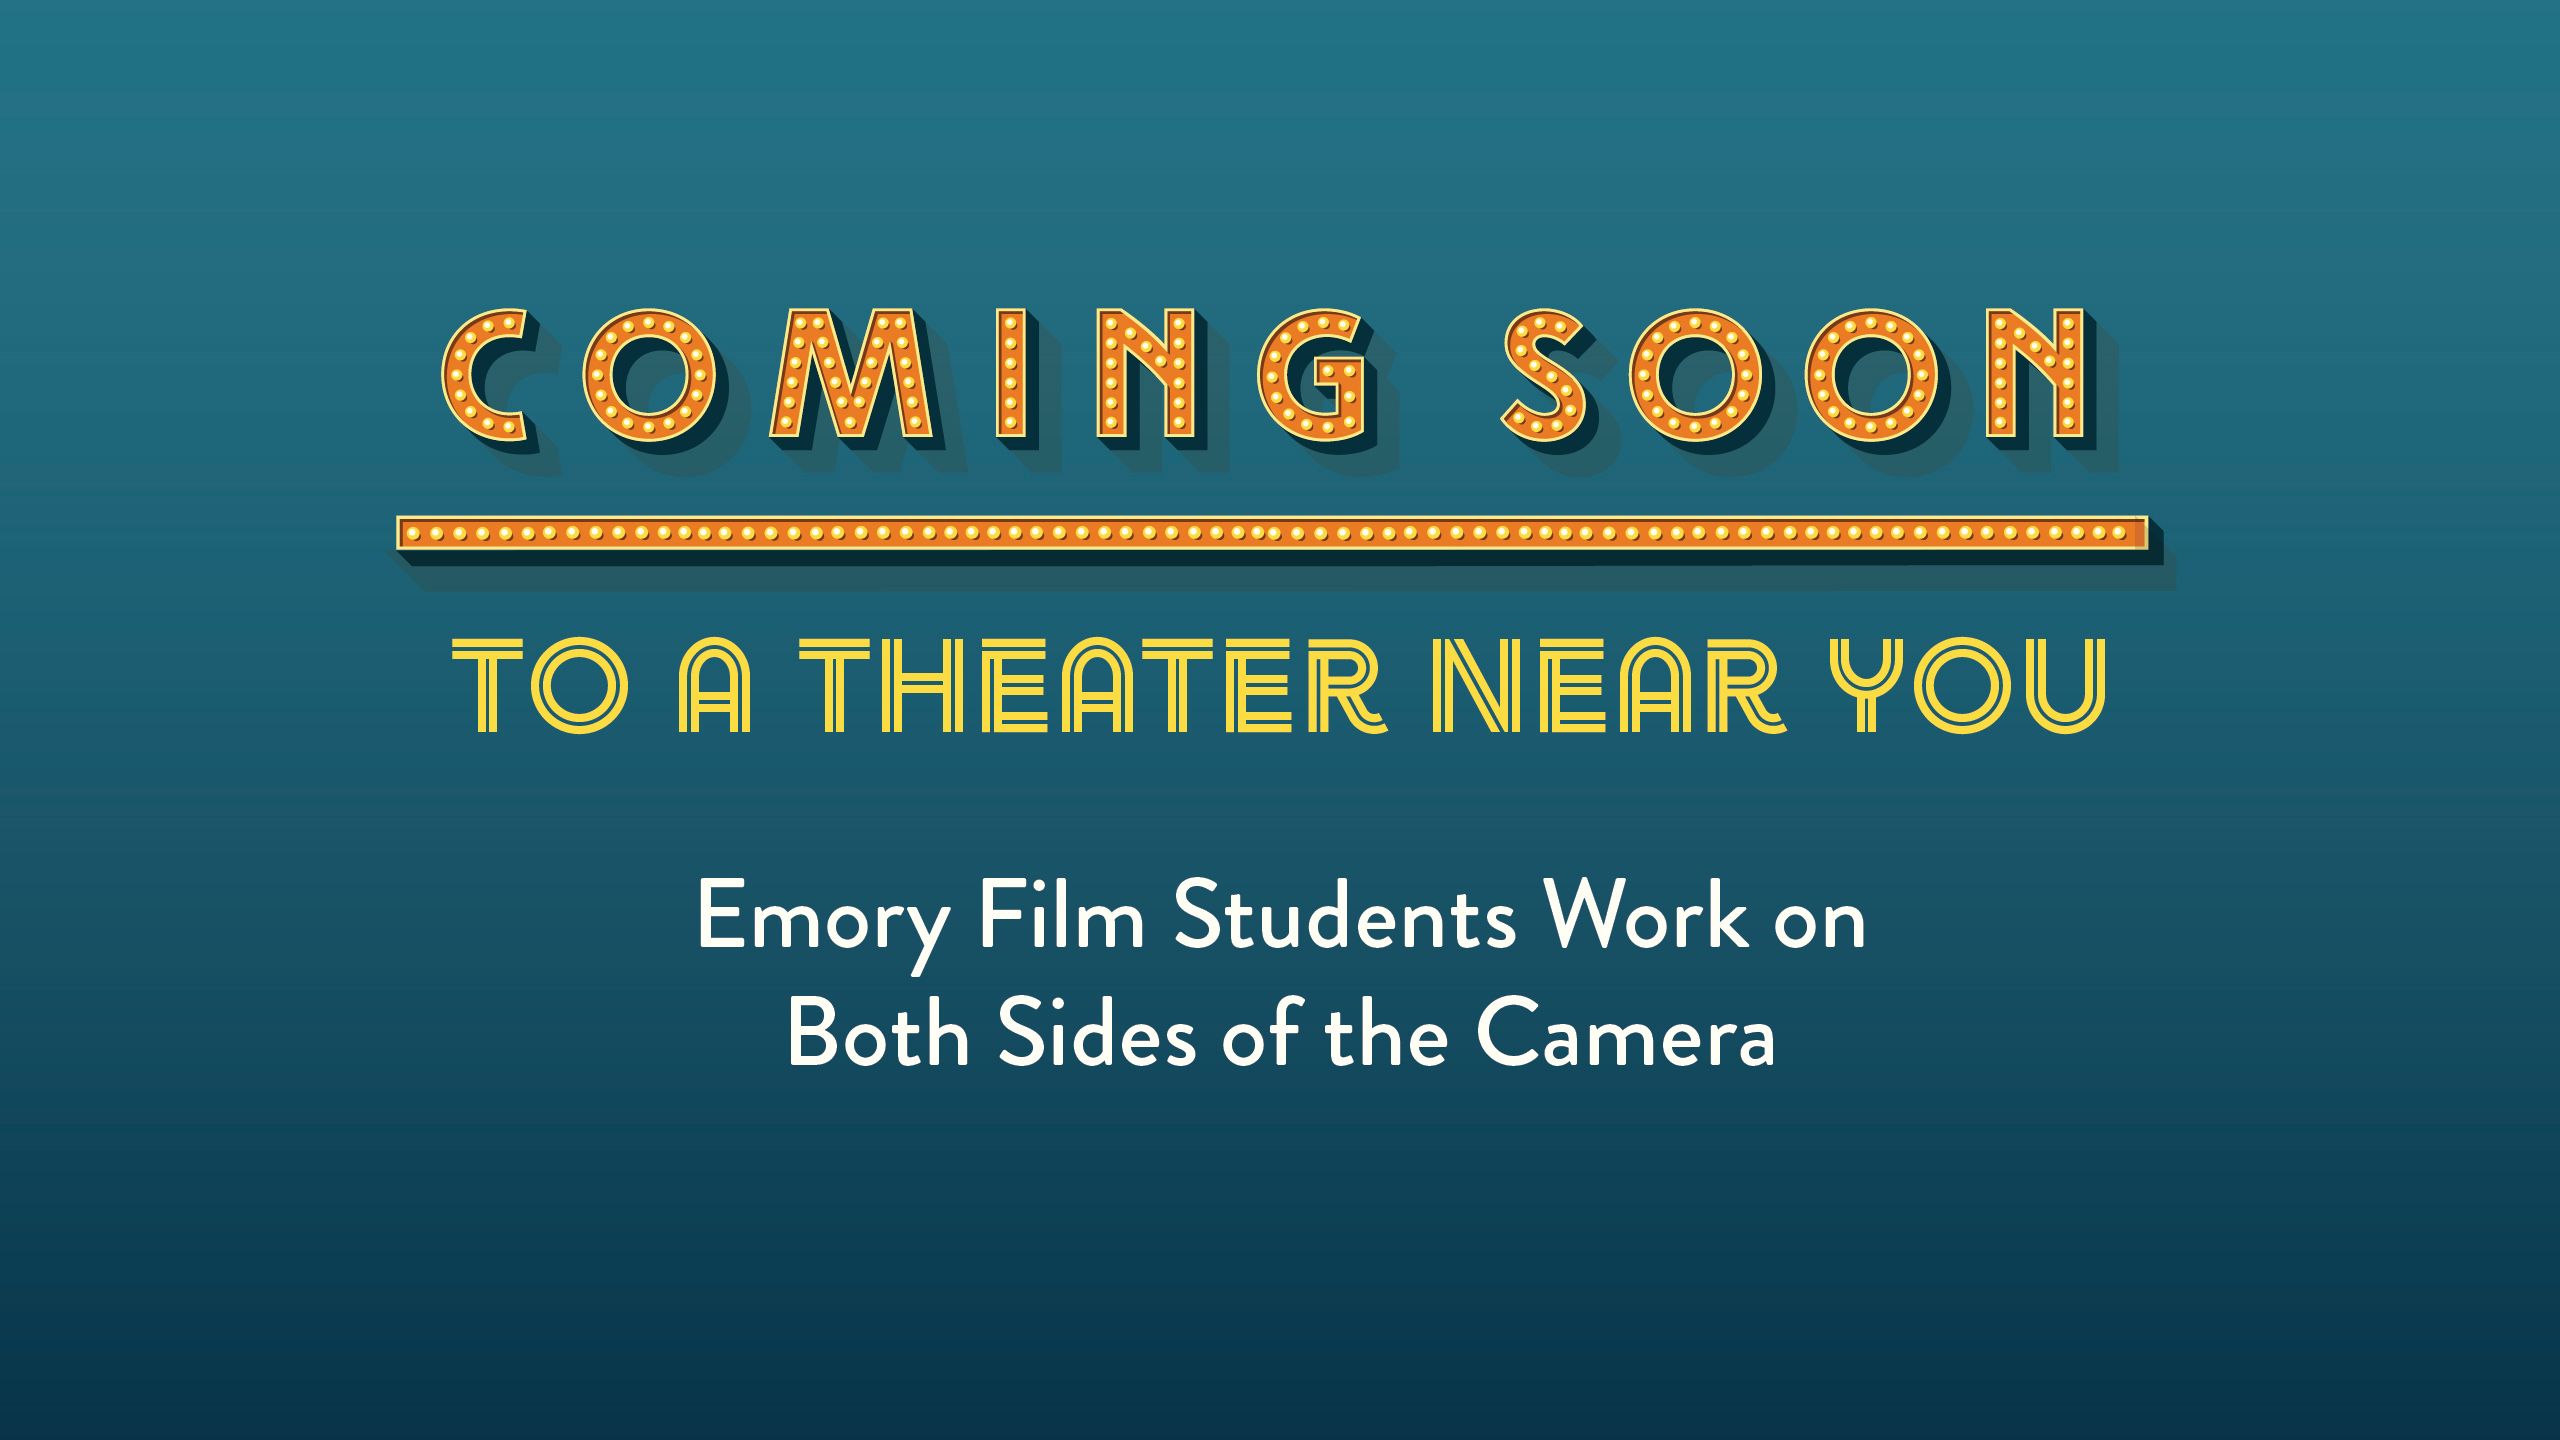 Title page: Coming Soon to a theater near you. Emory Film Students Work on Both Sides of the Camera